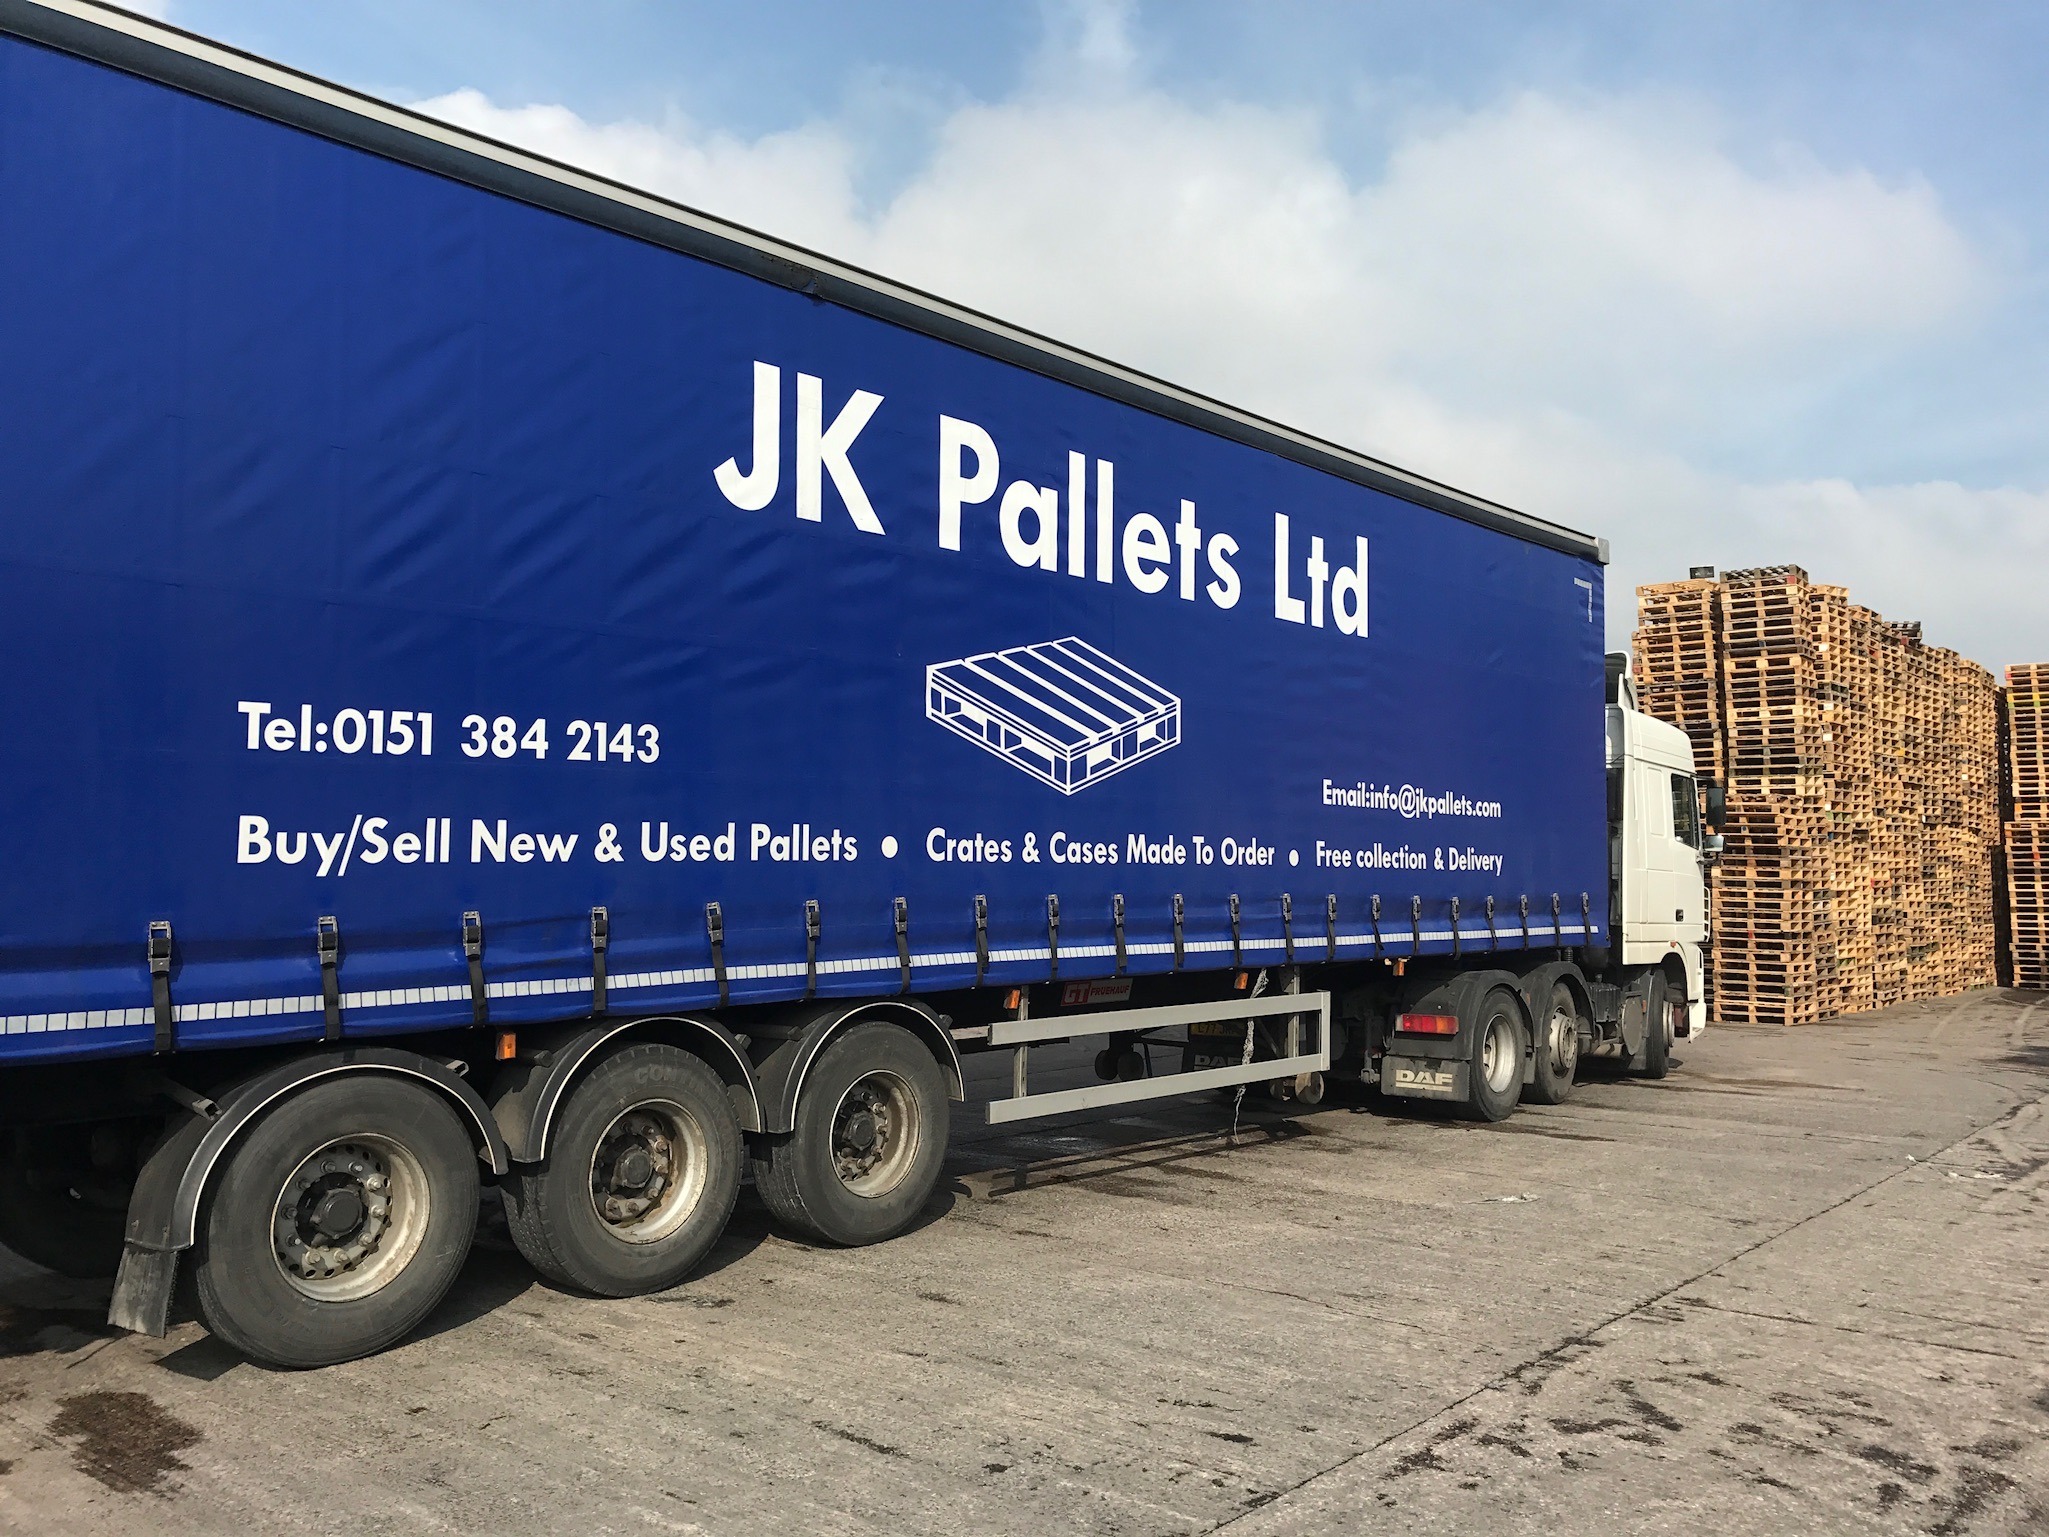 over 30,000 new and used pallets